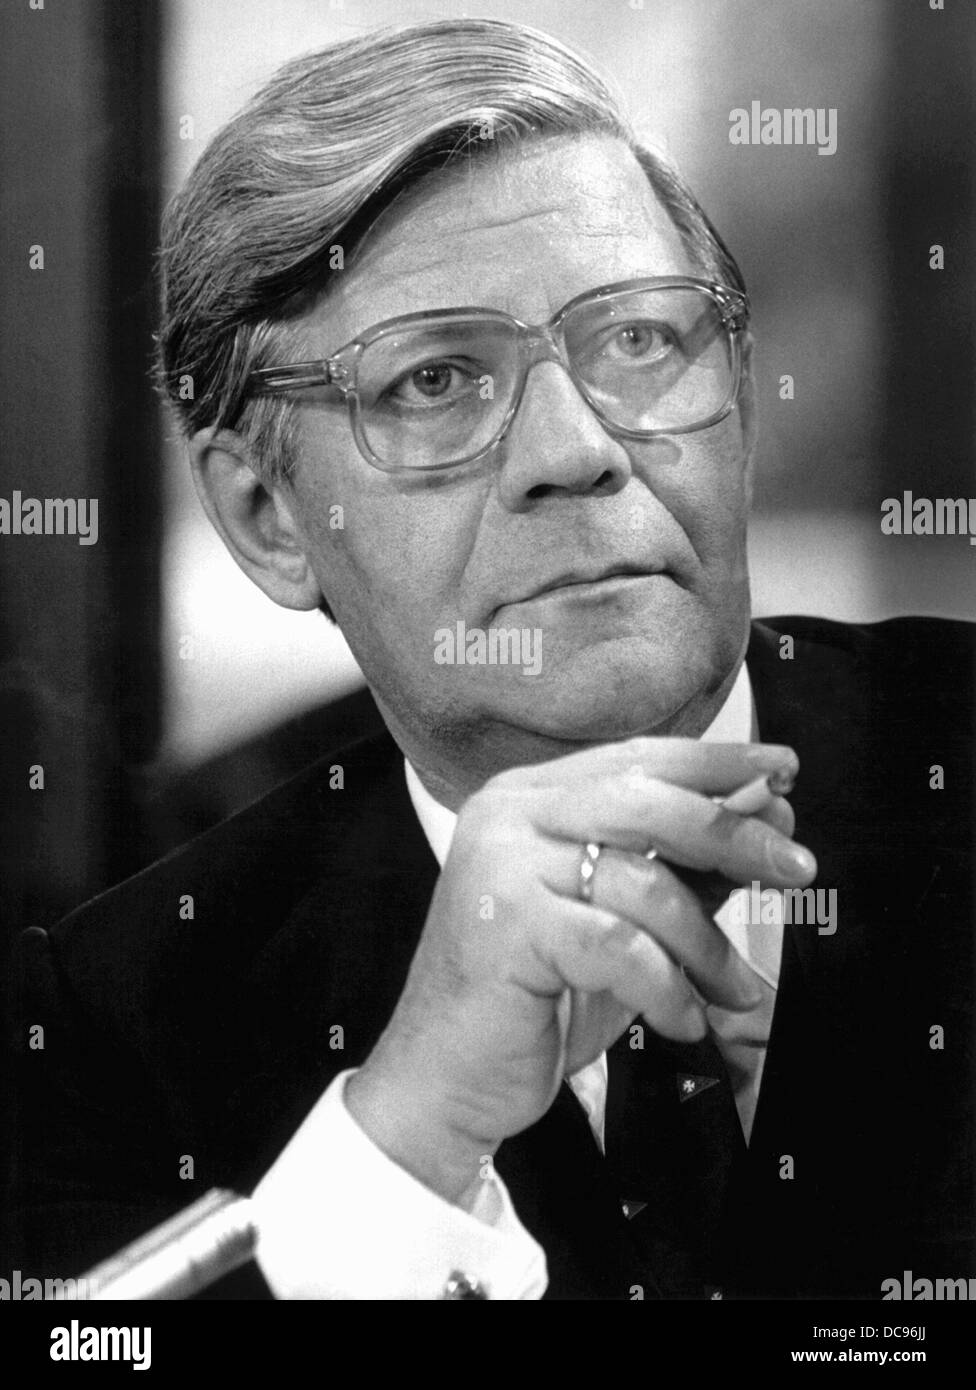 German chancellor Helmut Schmidt, typically with cigarette, during a press conference on the 19th of October in 1978 in Bonn. Stock Photo